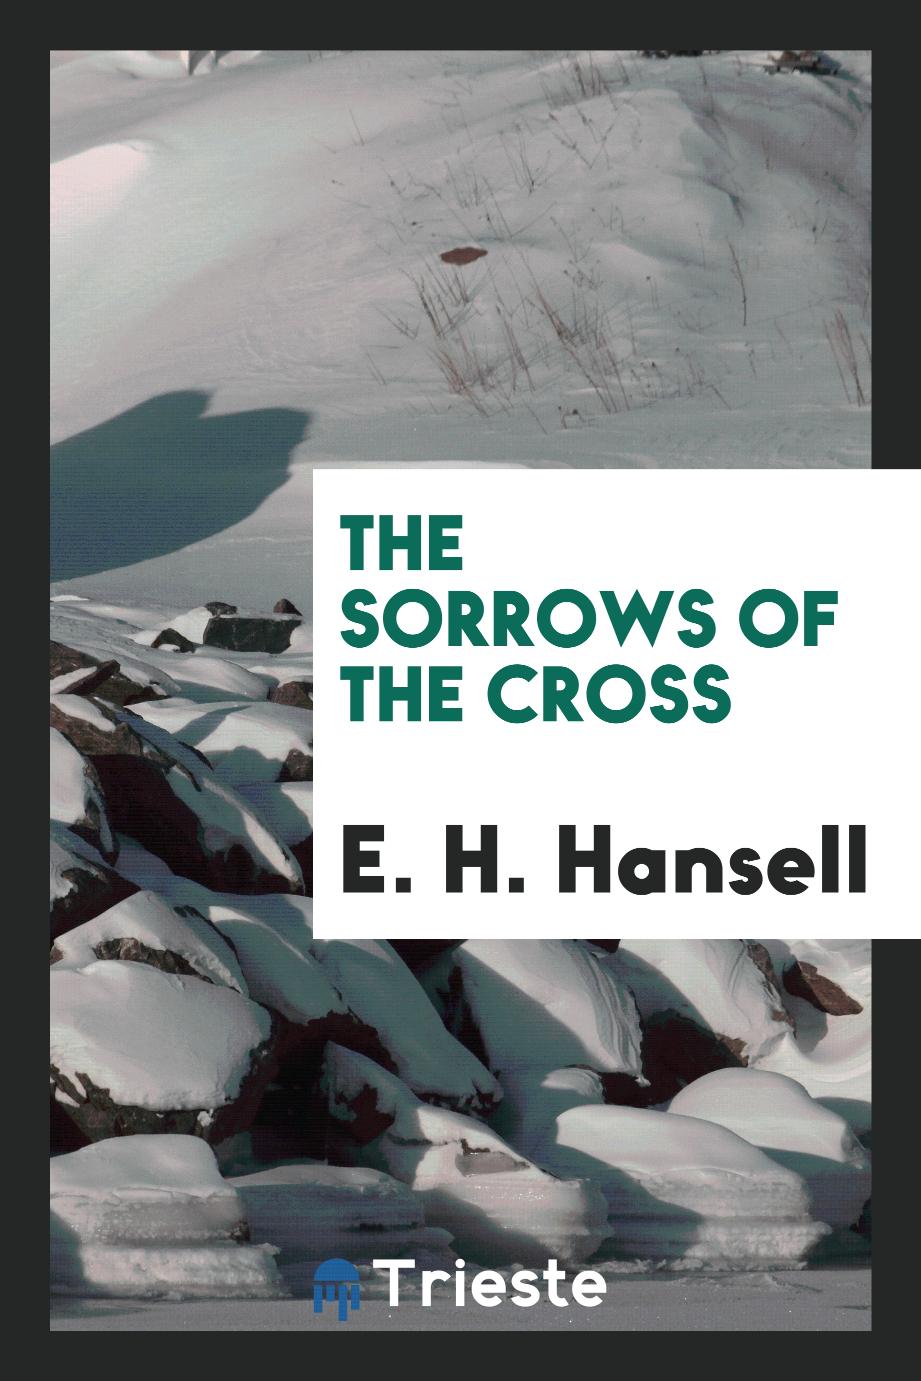 The sorrows of the Cross